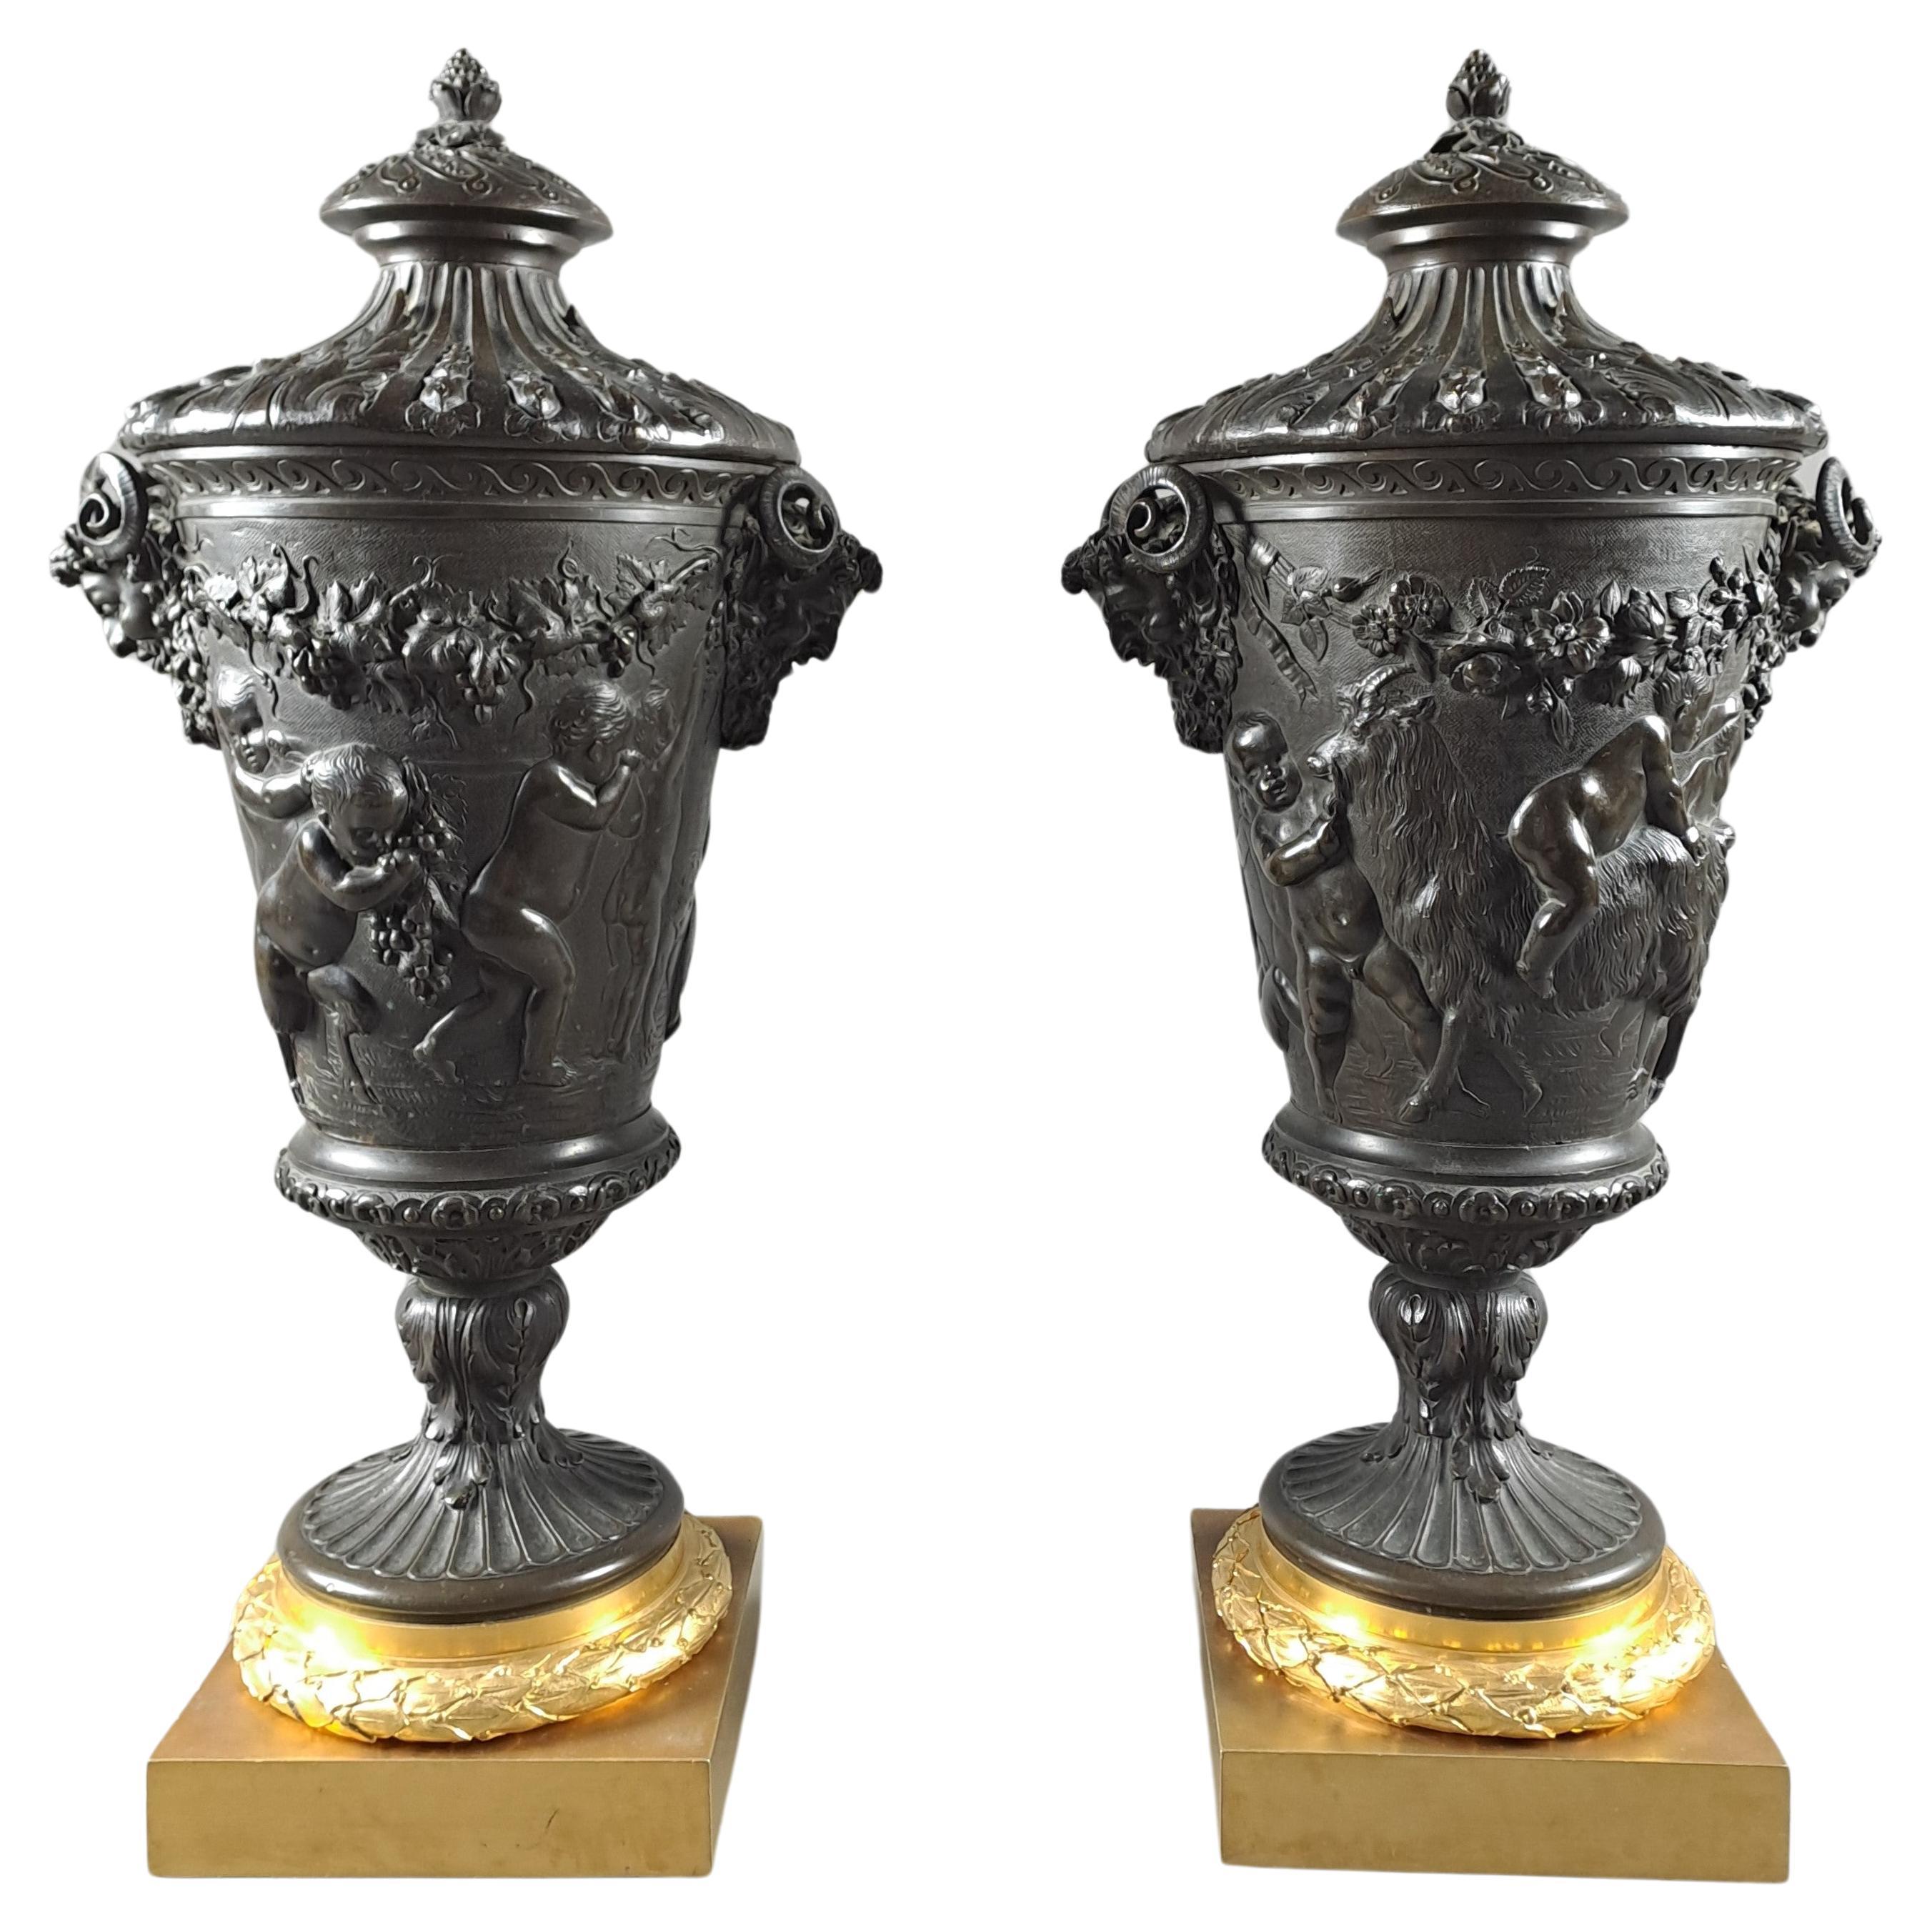 Pair Of Large Bronze Covered Vases In The Taste Of Clodion